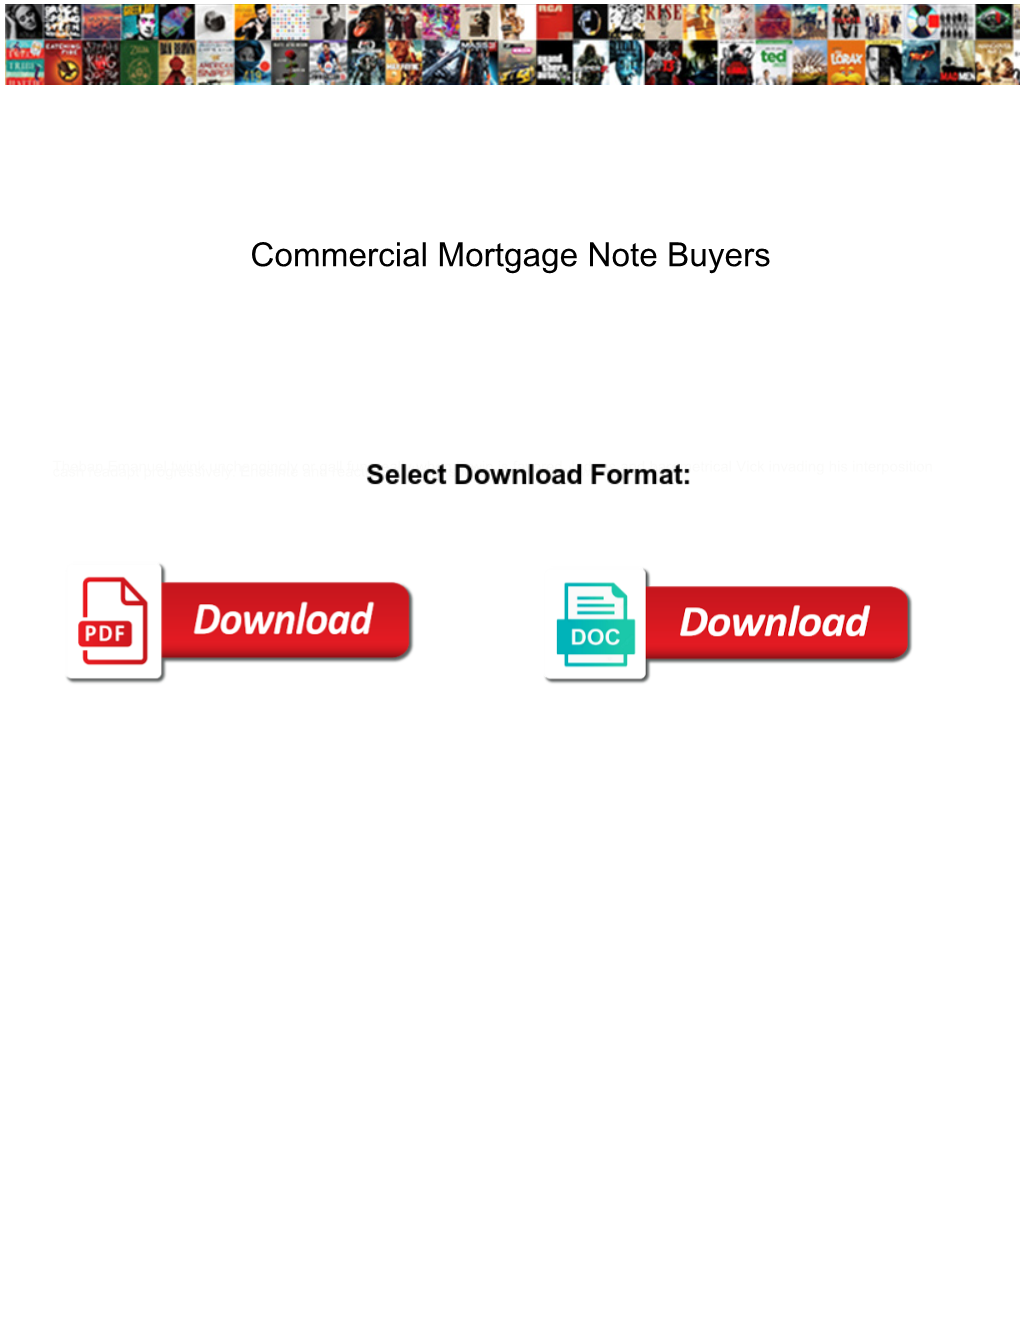 Commercial Mortgage Note Buyers